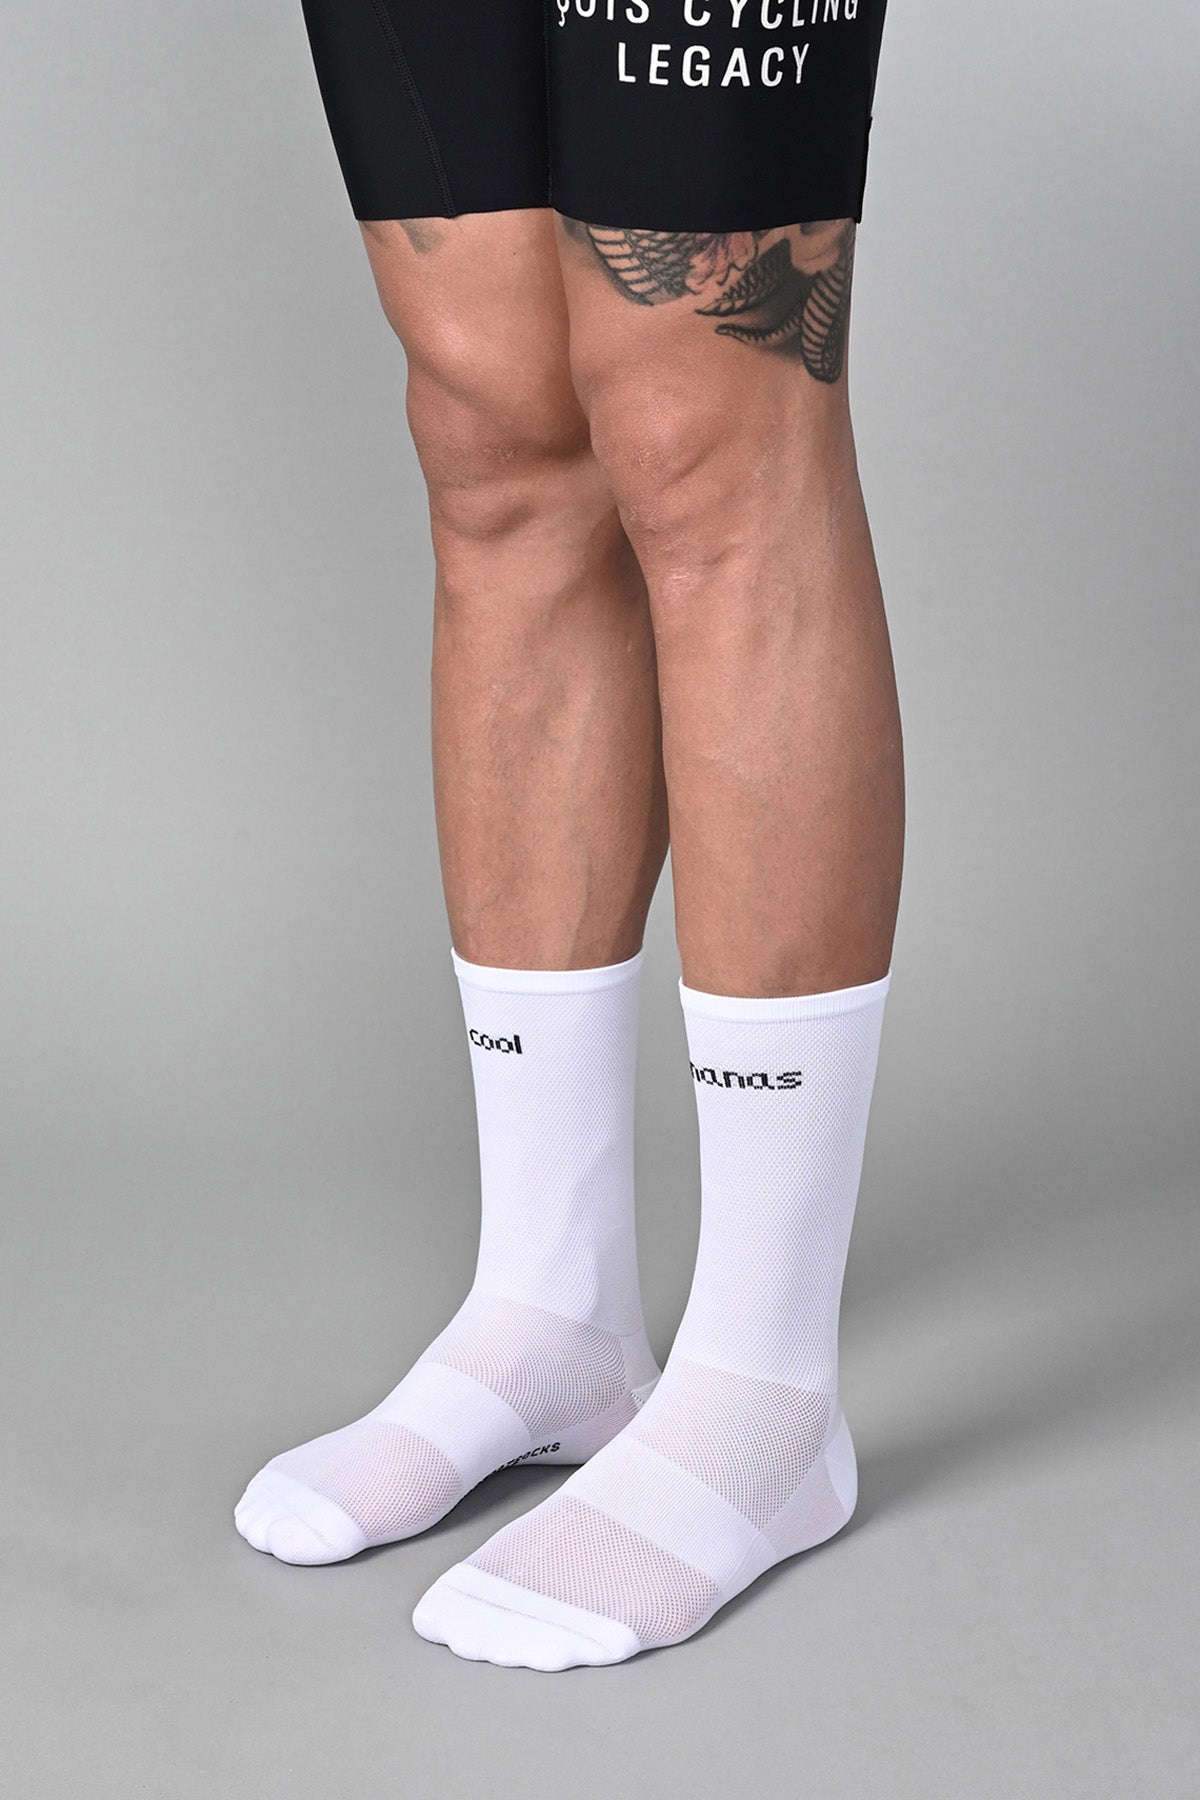 COOL BANANAS - WHITE FRONT SIDE | BEST CYCLING SOCKS